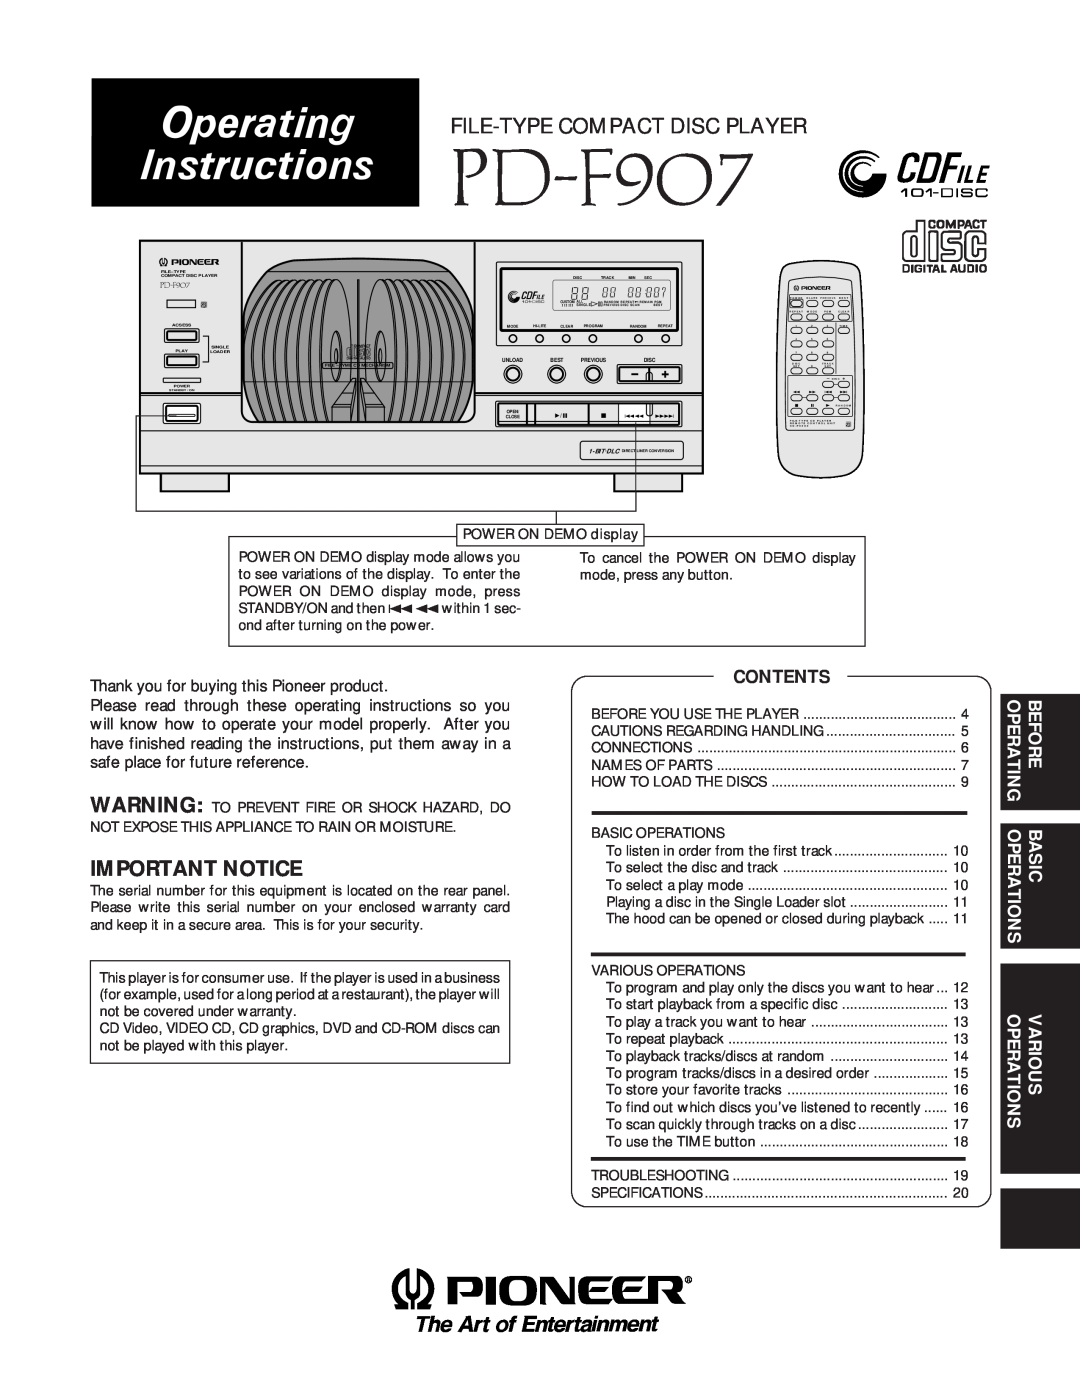 Pioneer PD-F907 specifications Important Notice, Operating, Before, Operations, Basic, Various, ×óÀX/?³ 